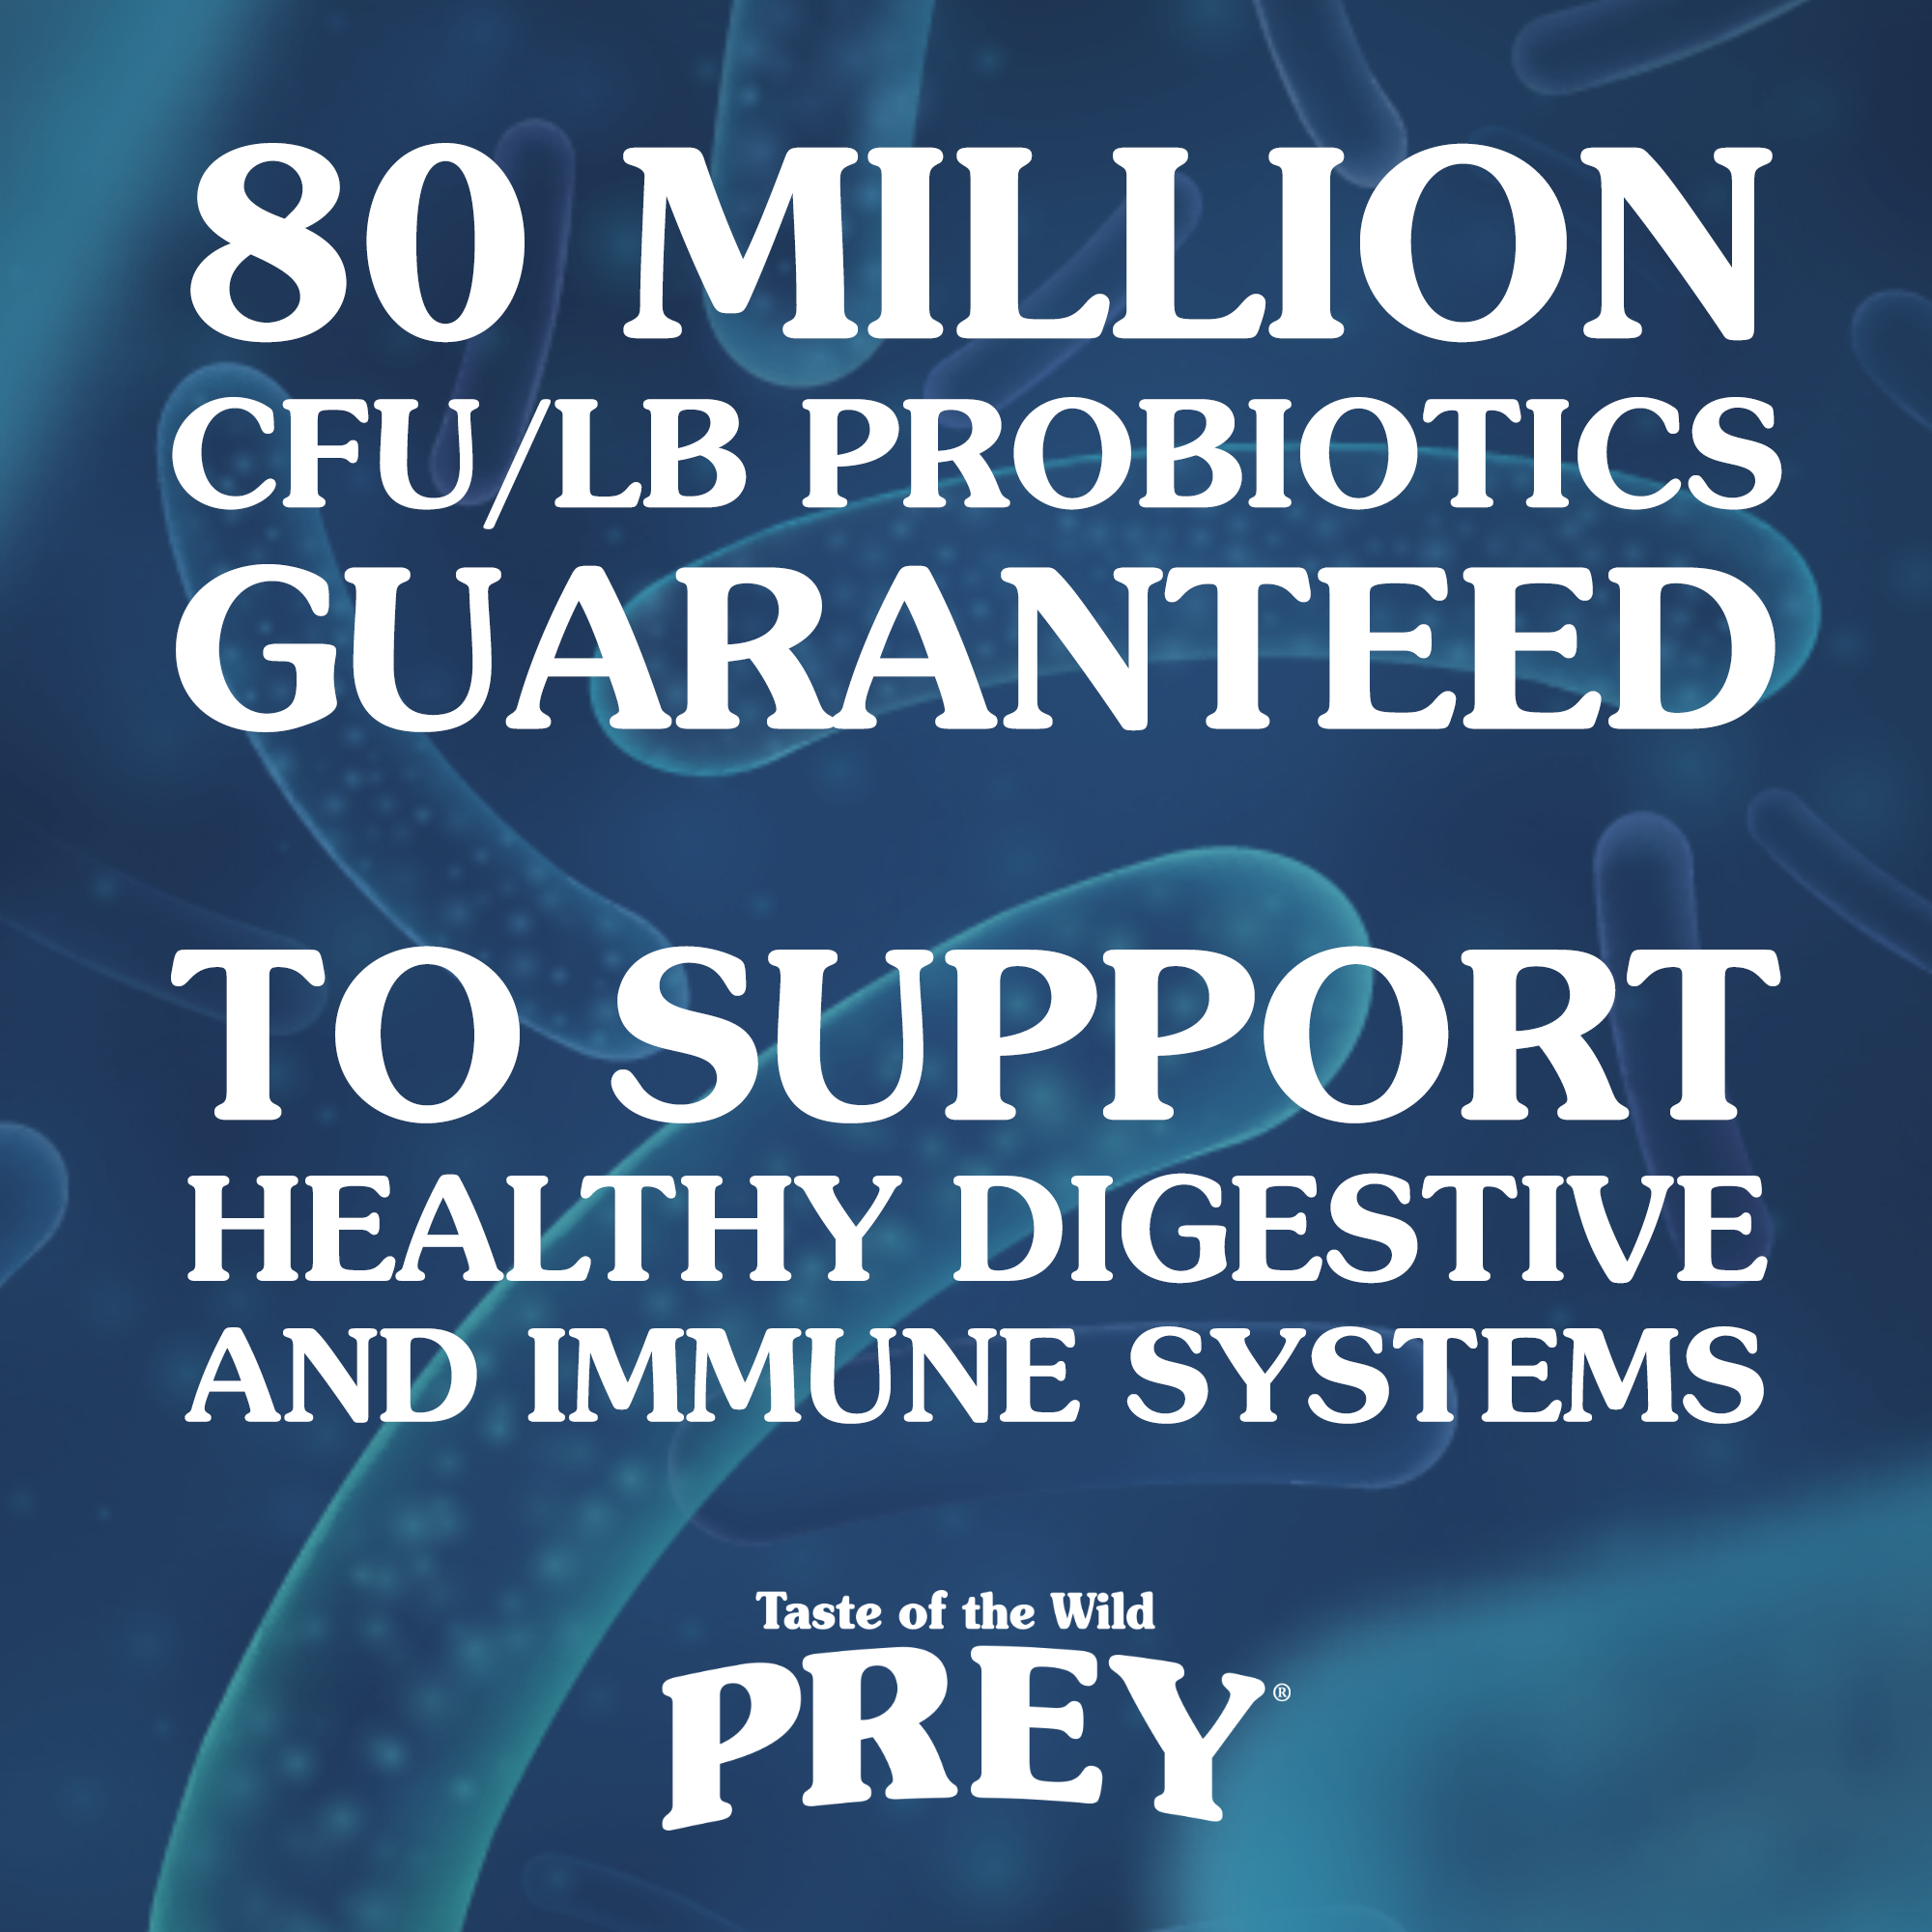 80 million CFU/LB probiotics guaranteed. To support healthy digestive and immune systems | Taste of the Wild